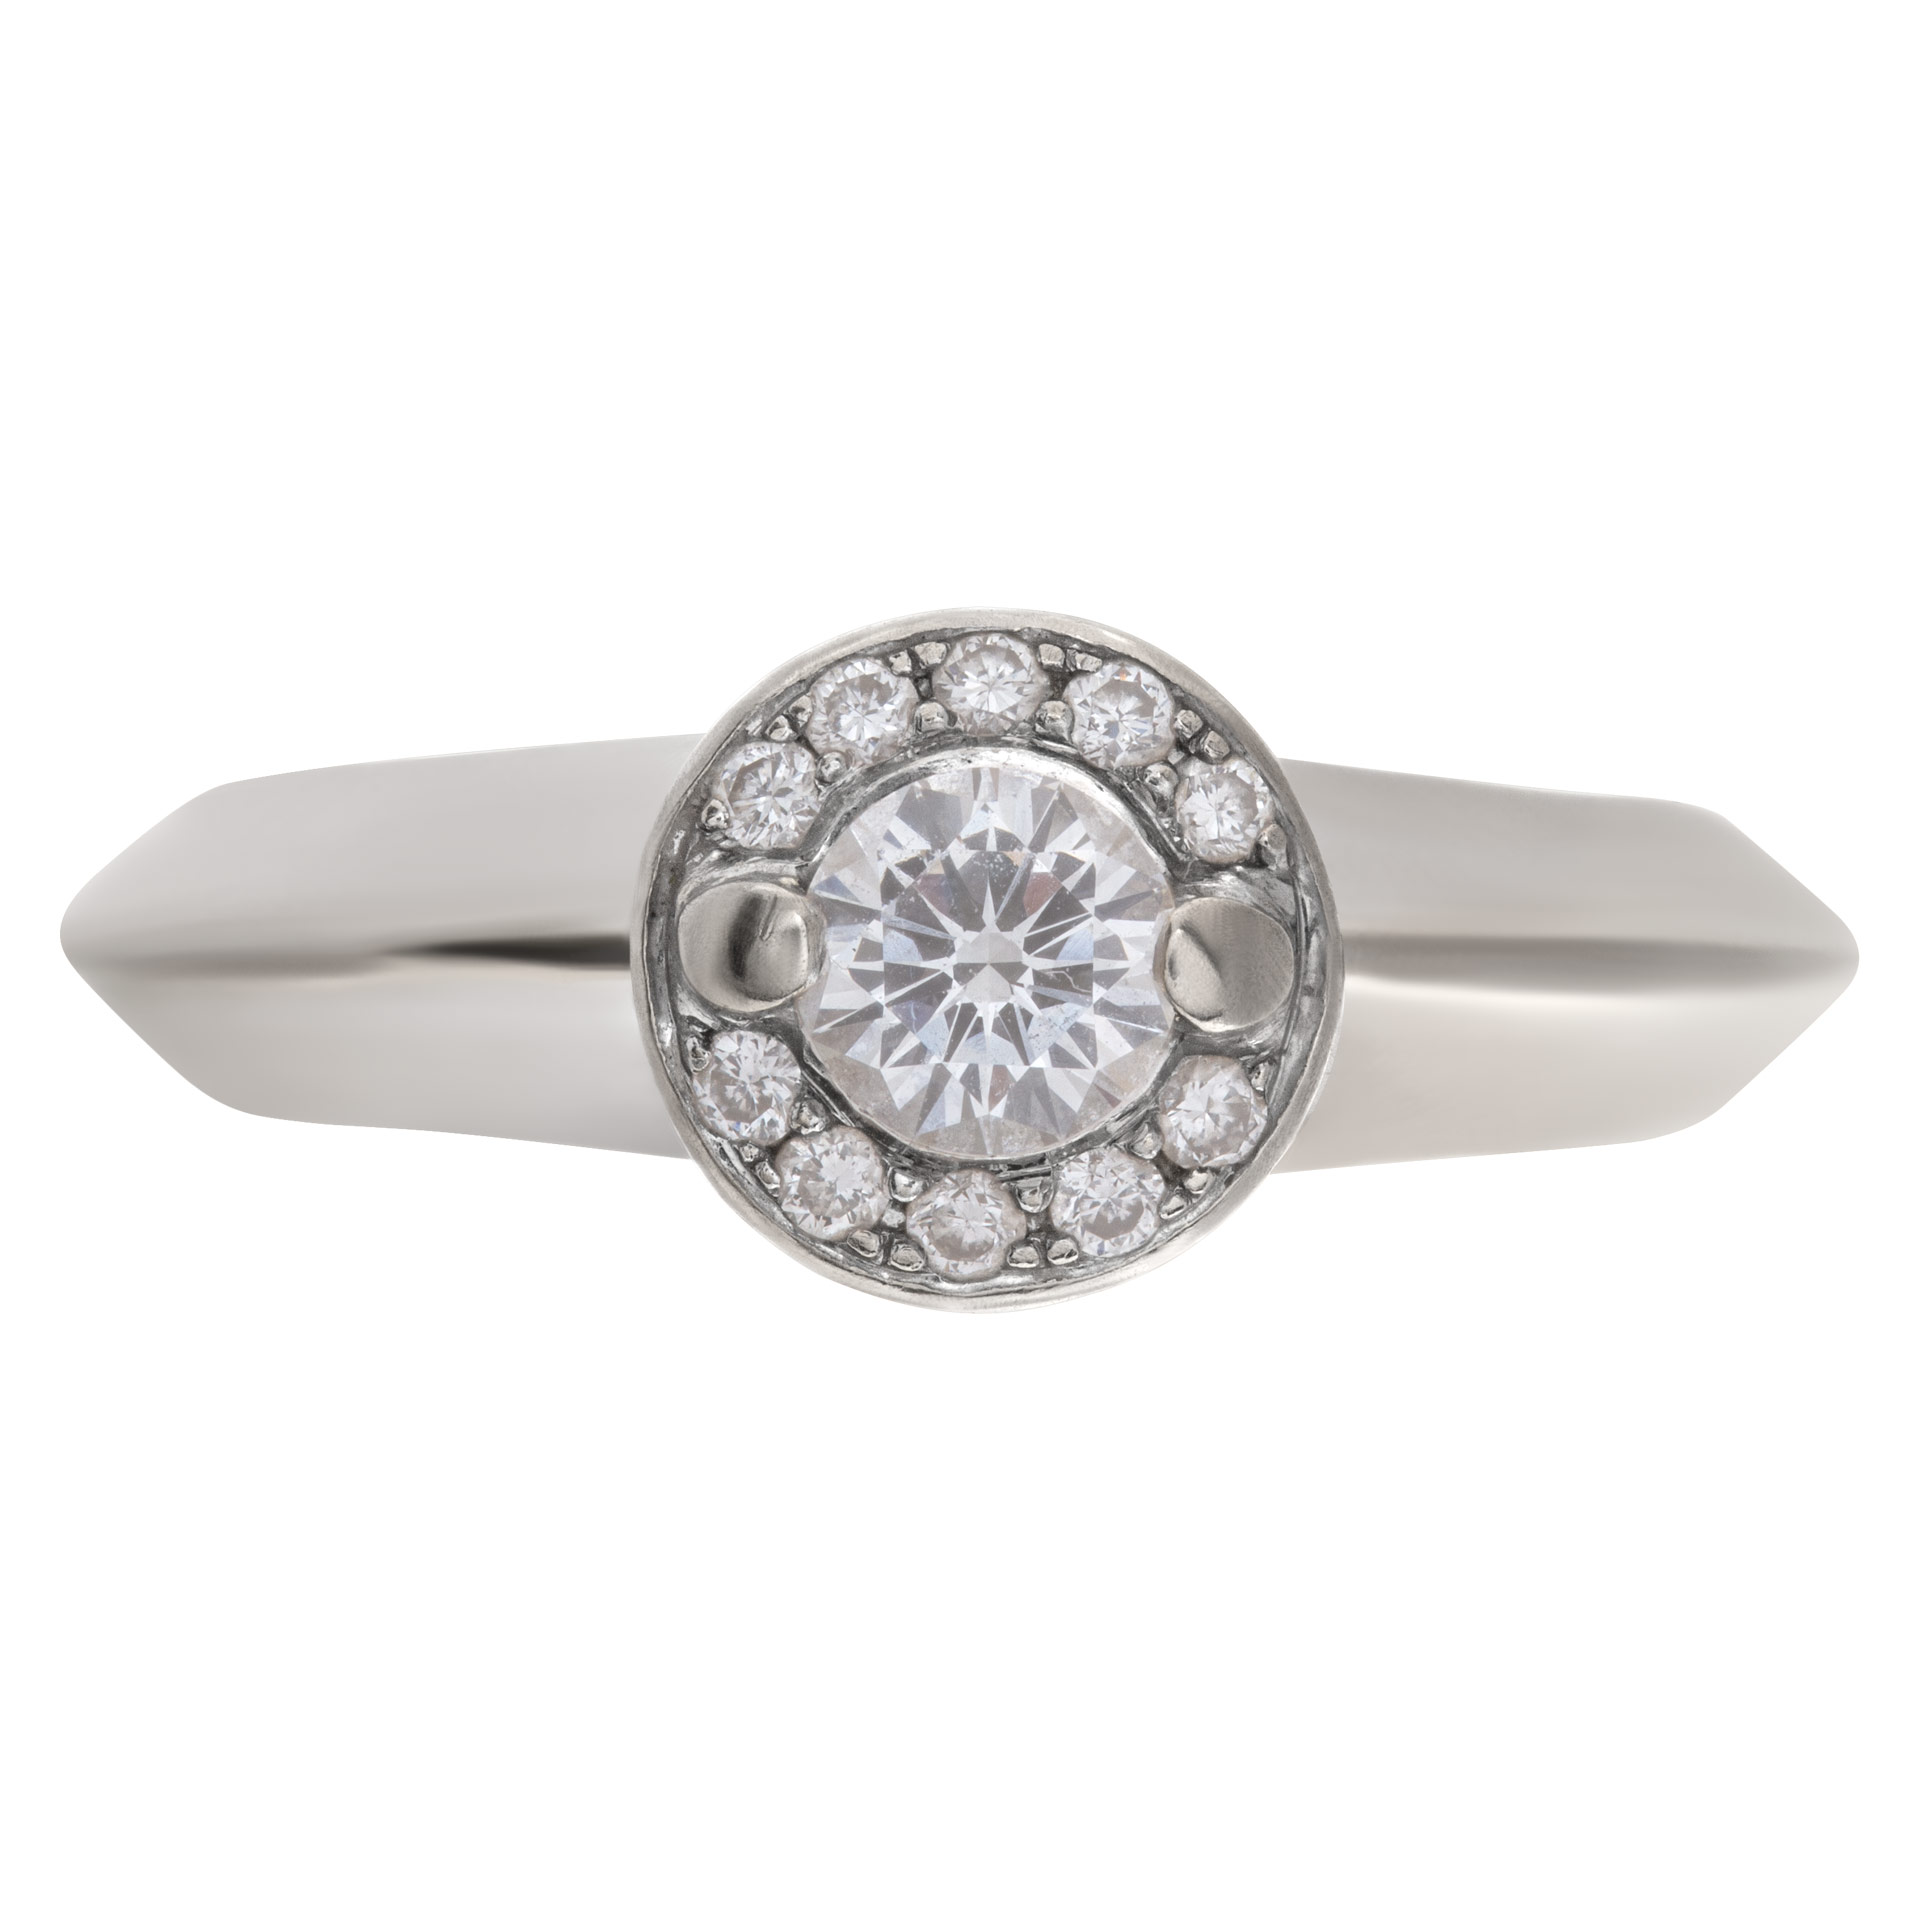 Diamond ring in 18k white gold with approximately 0.43 carats